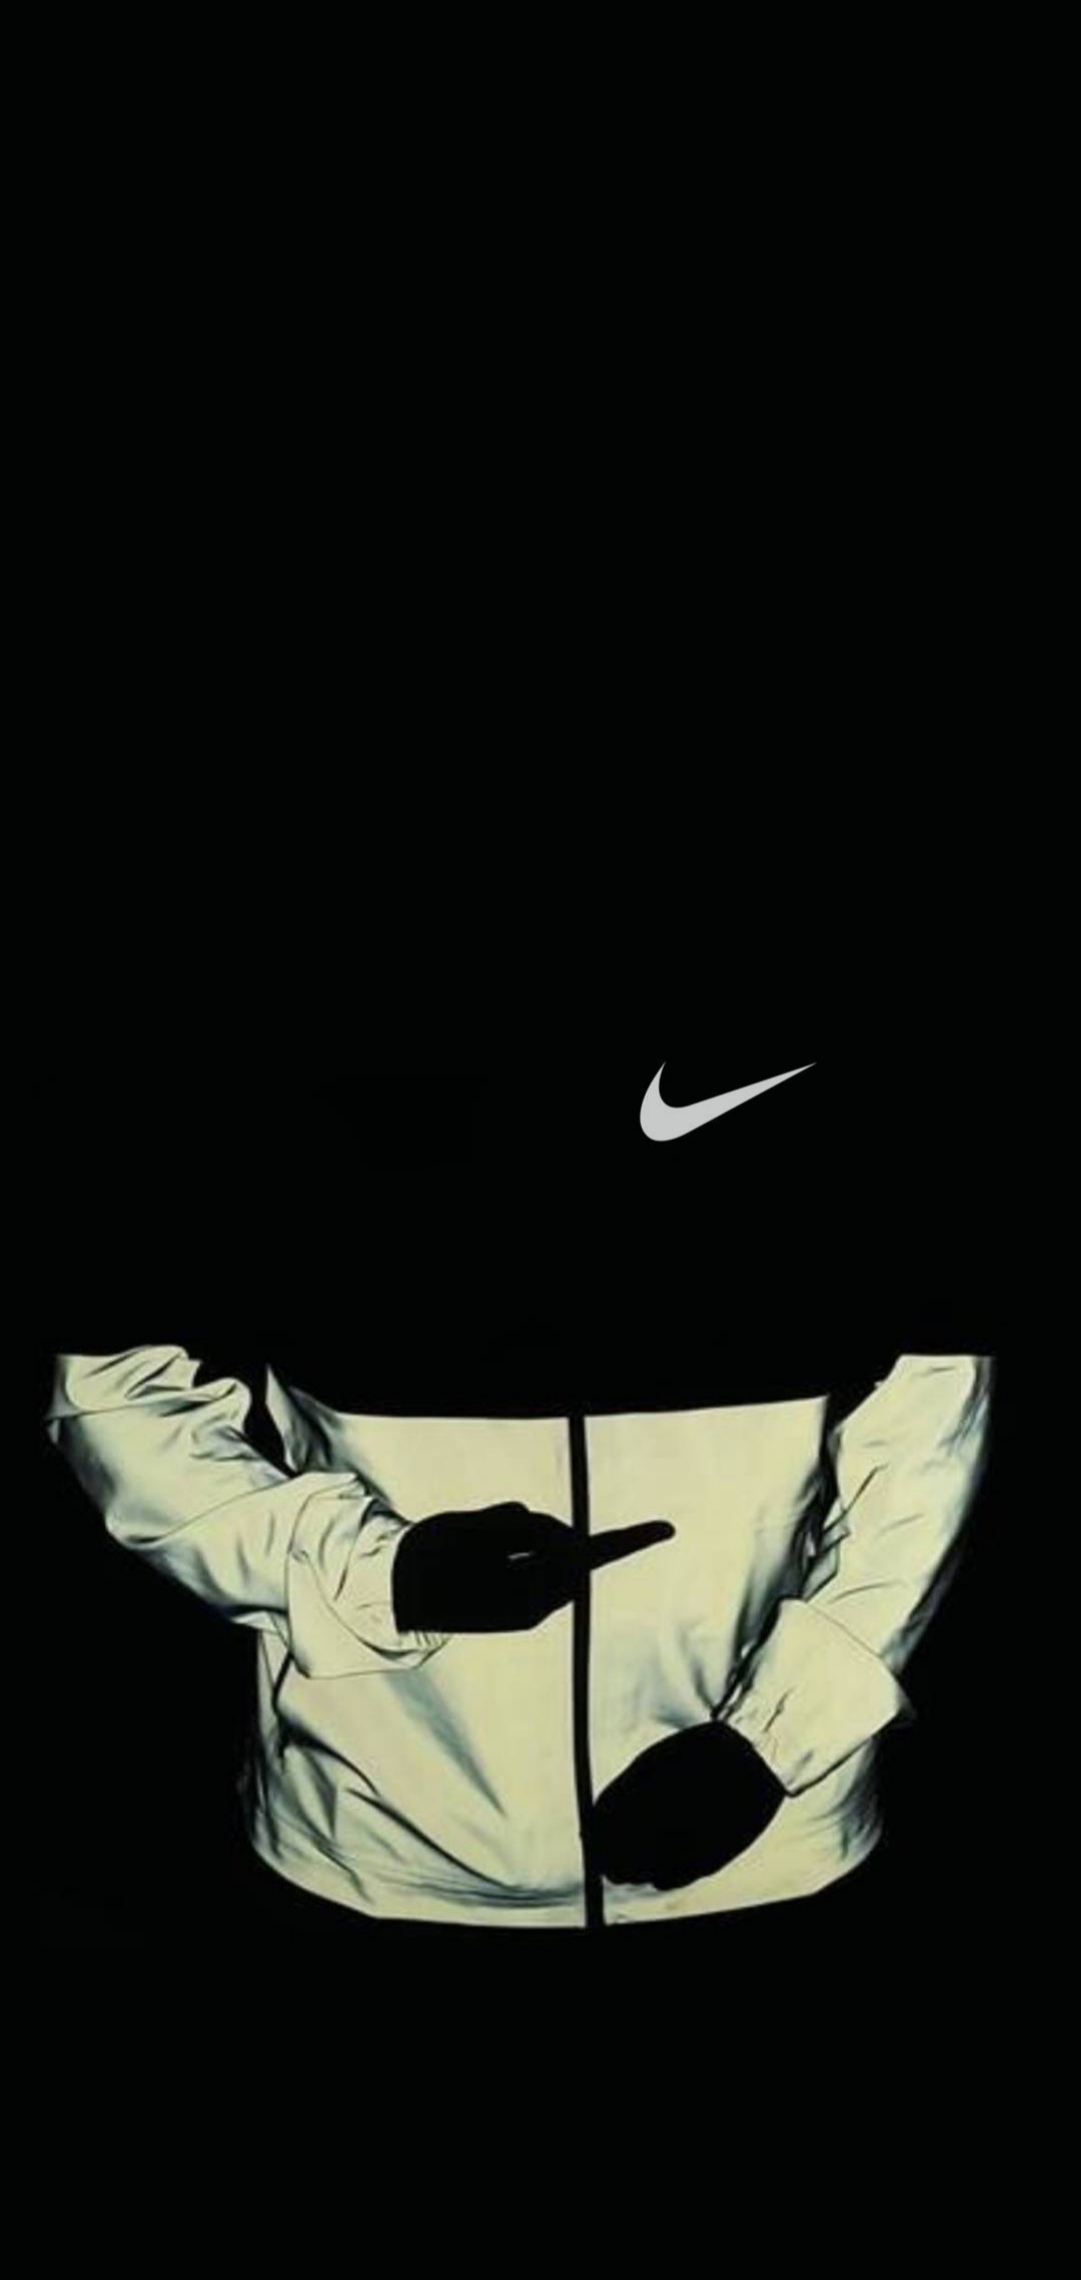 1081x2280 Nike Wallpapers Top Best 75 Nike Backgrounds Download